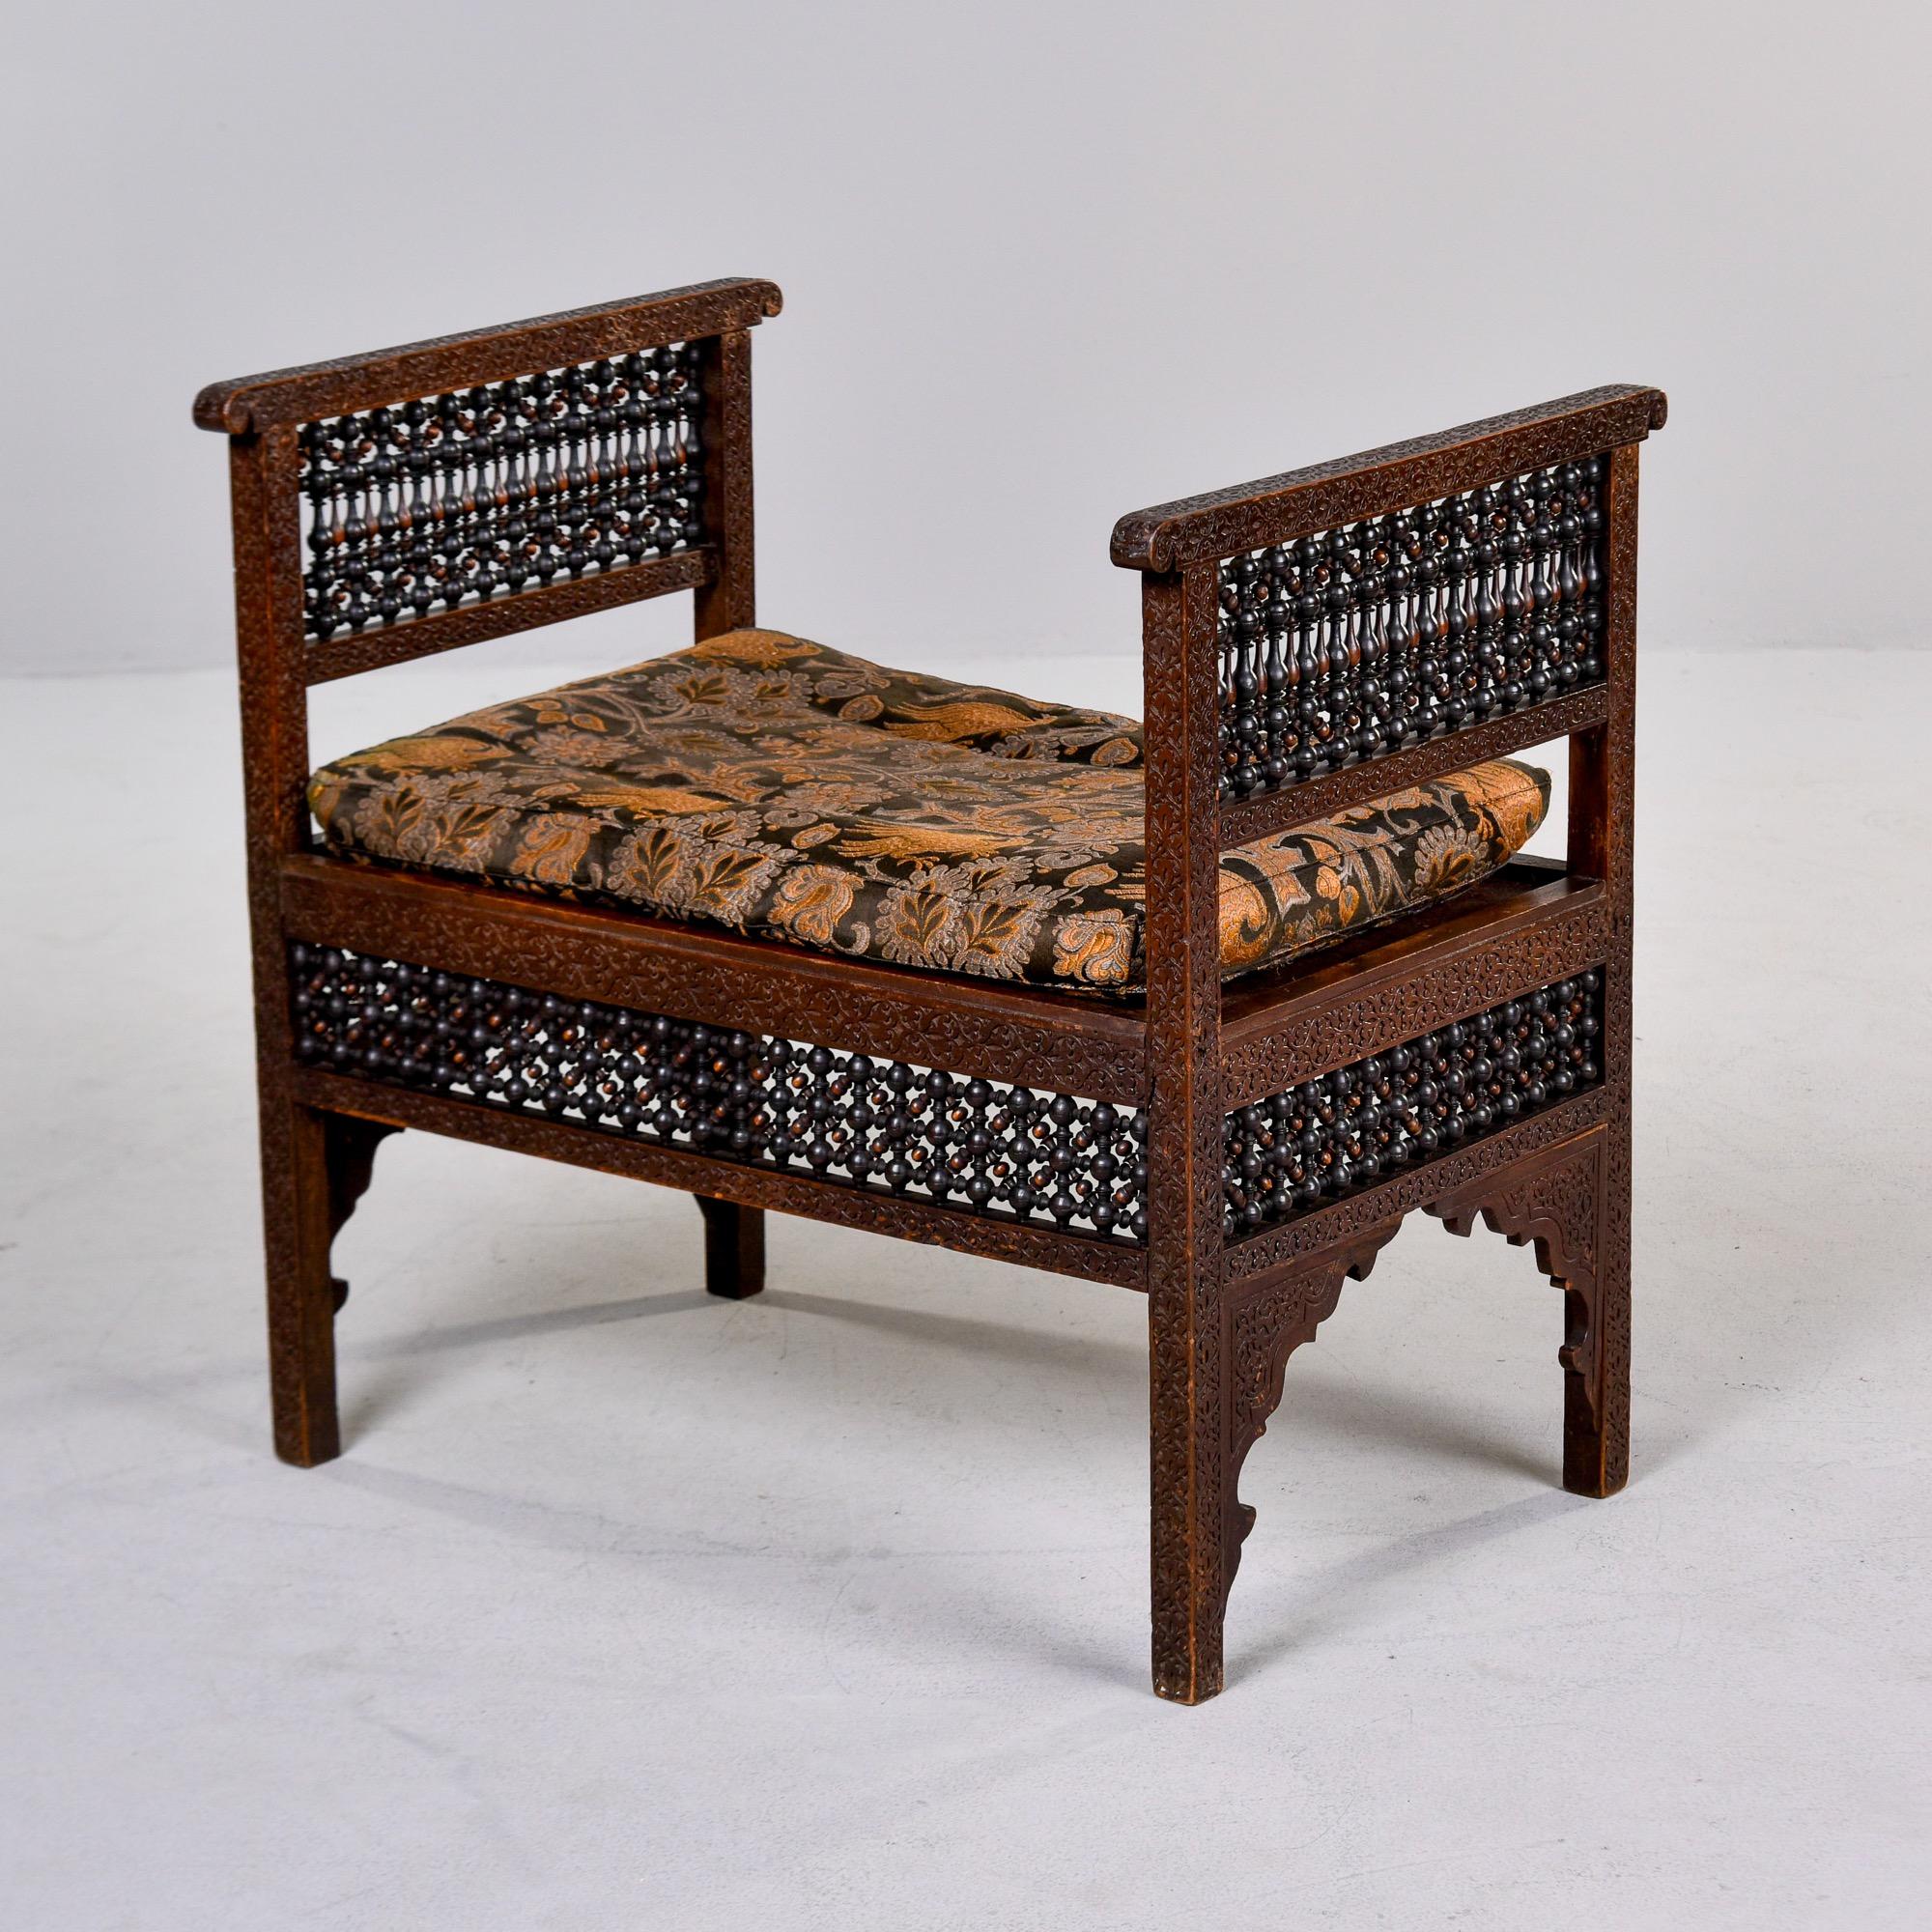 Early 20th C Heavily Carved Teak Moorish Bench With Tall Sides and Cushion In Good Condition For Sale In Troy, MI